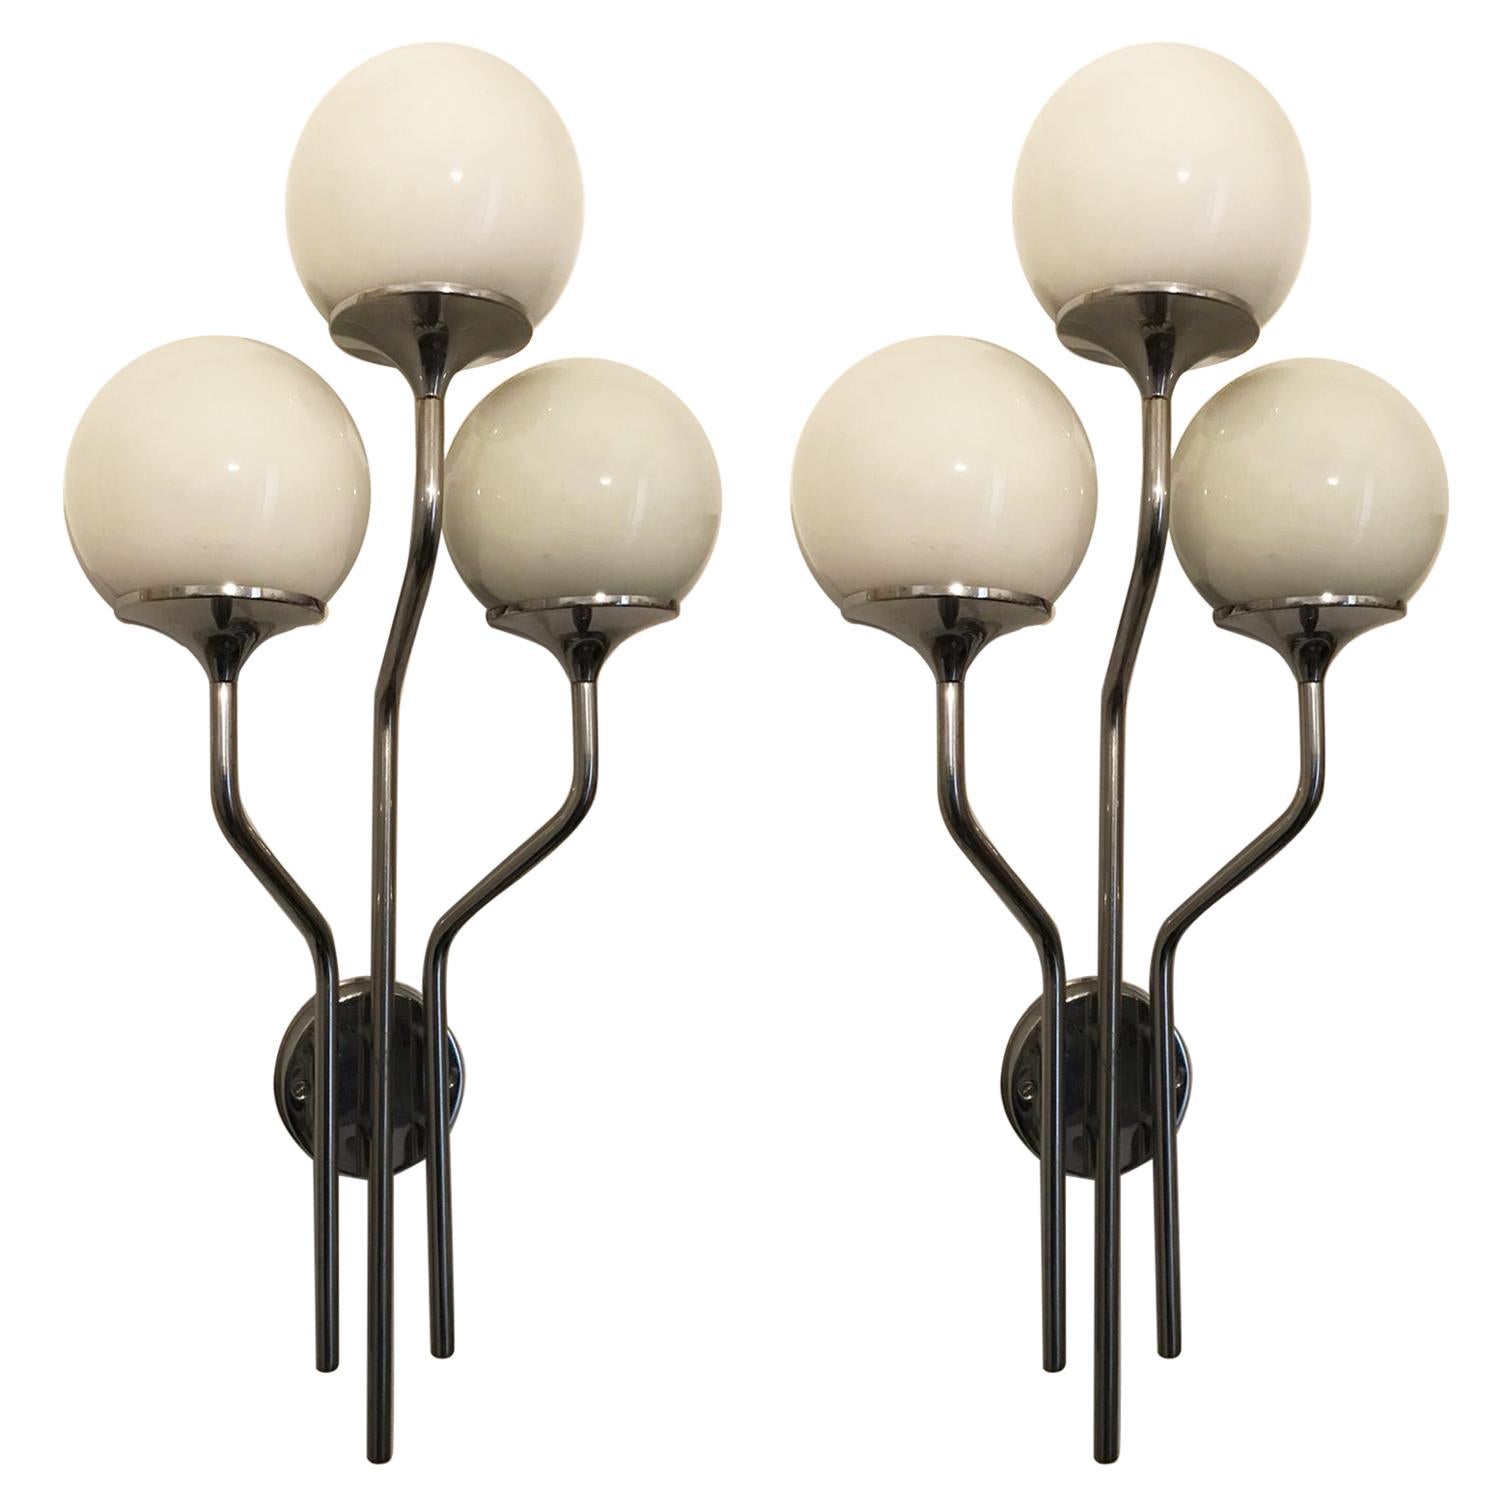 Stunning Pair of Chrome Wall Lights by Reggiani, Italy, 1960s